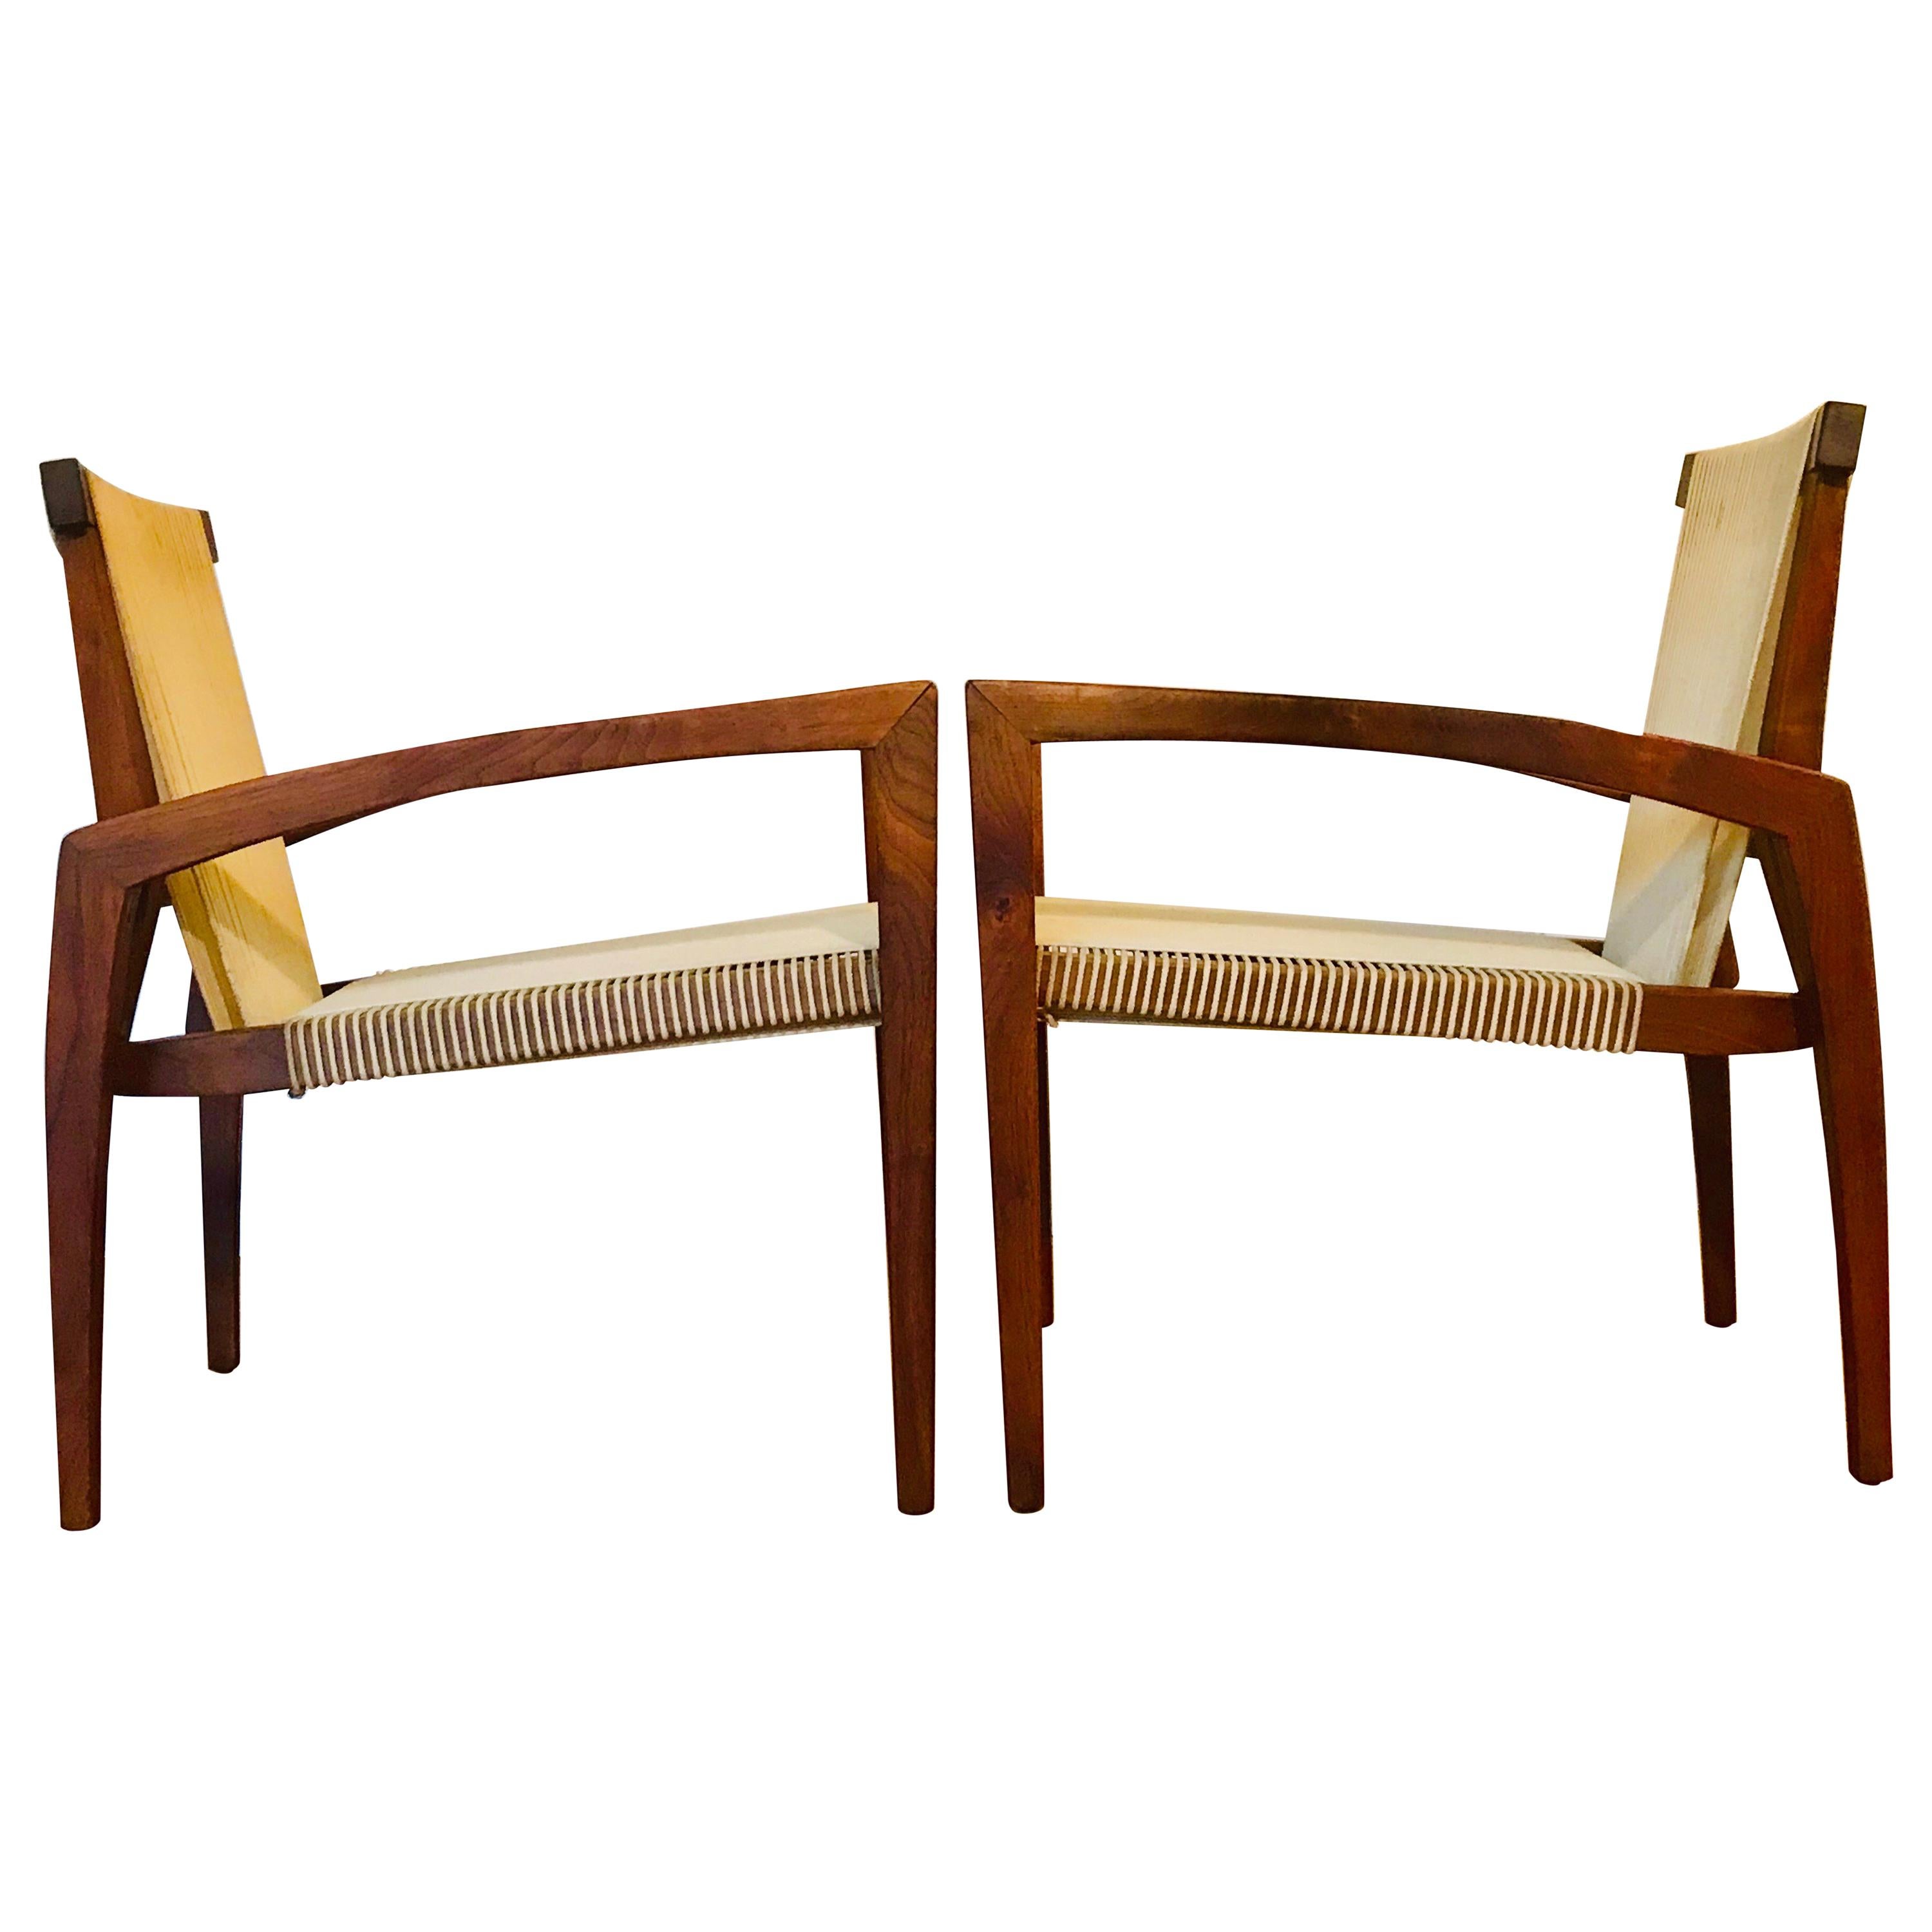 Irving Sabo Studio Craft Design Wood + String Chairs For Sale